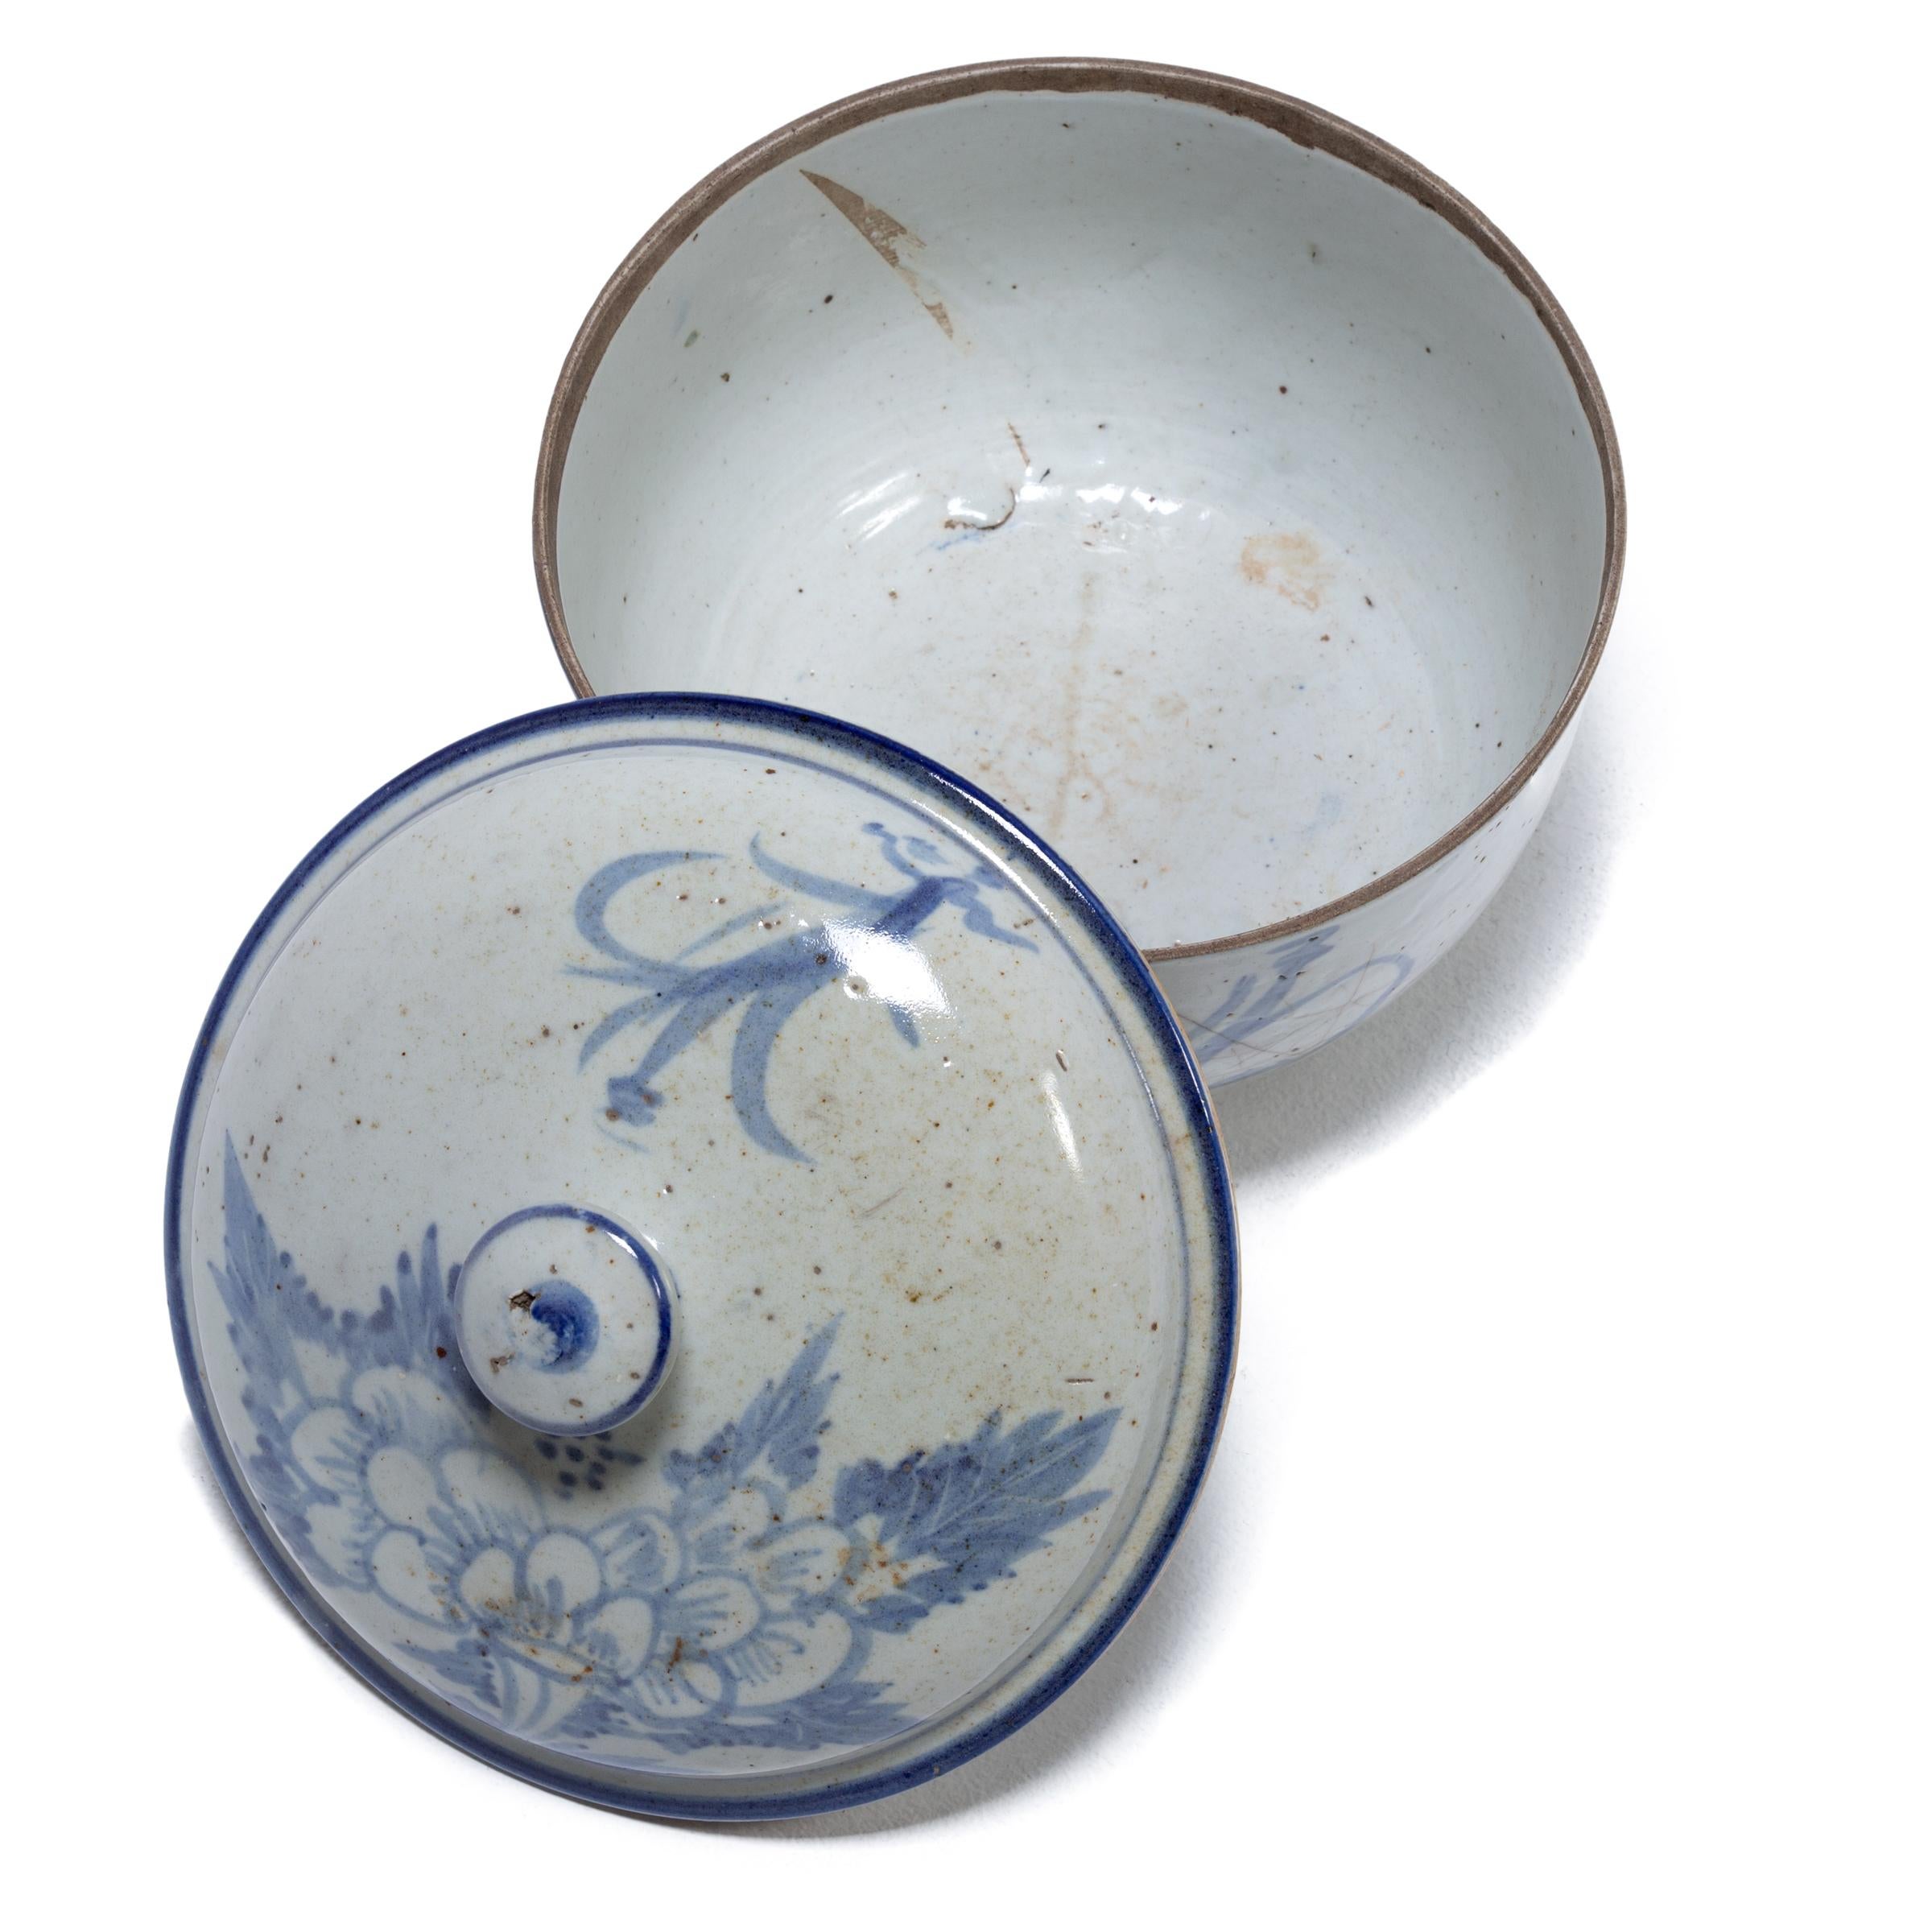 Porcelain Chinese Blue and White Peony Congee Pot, circa 1900